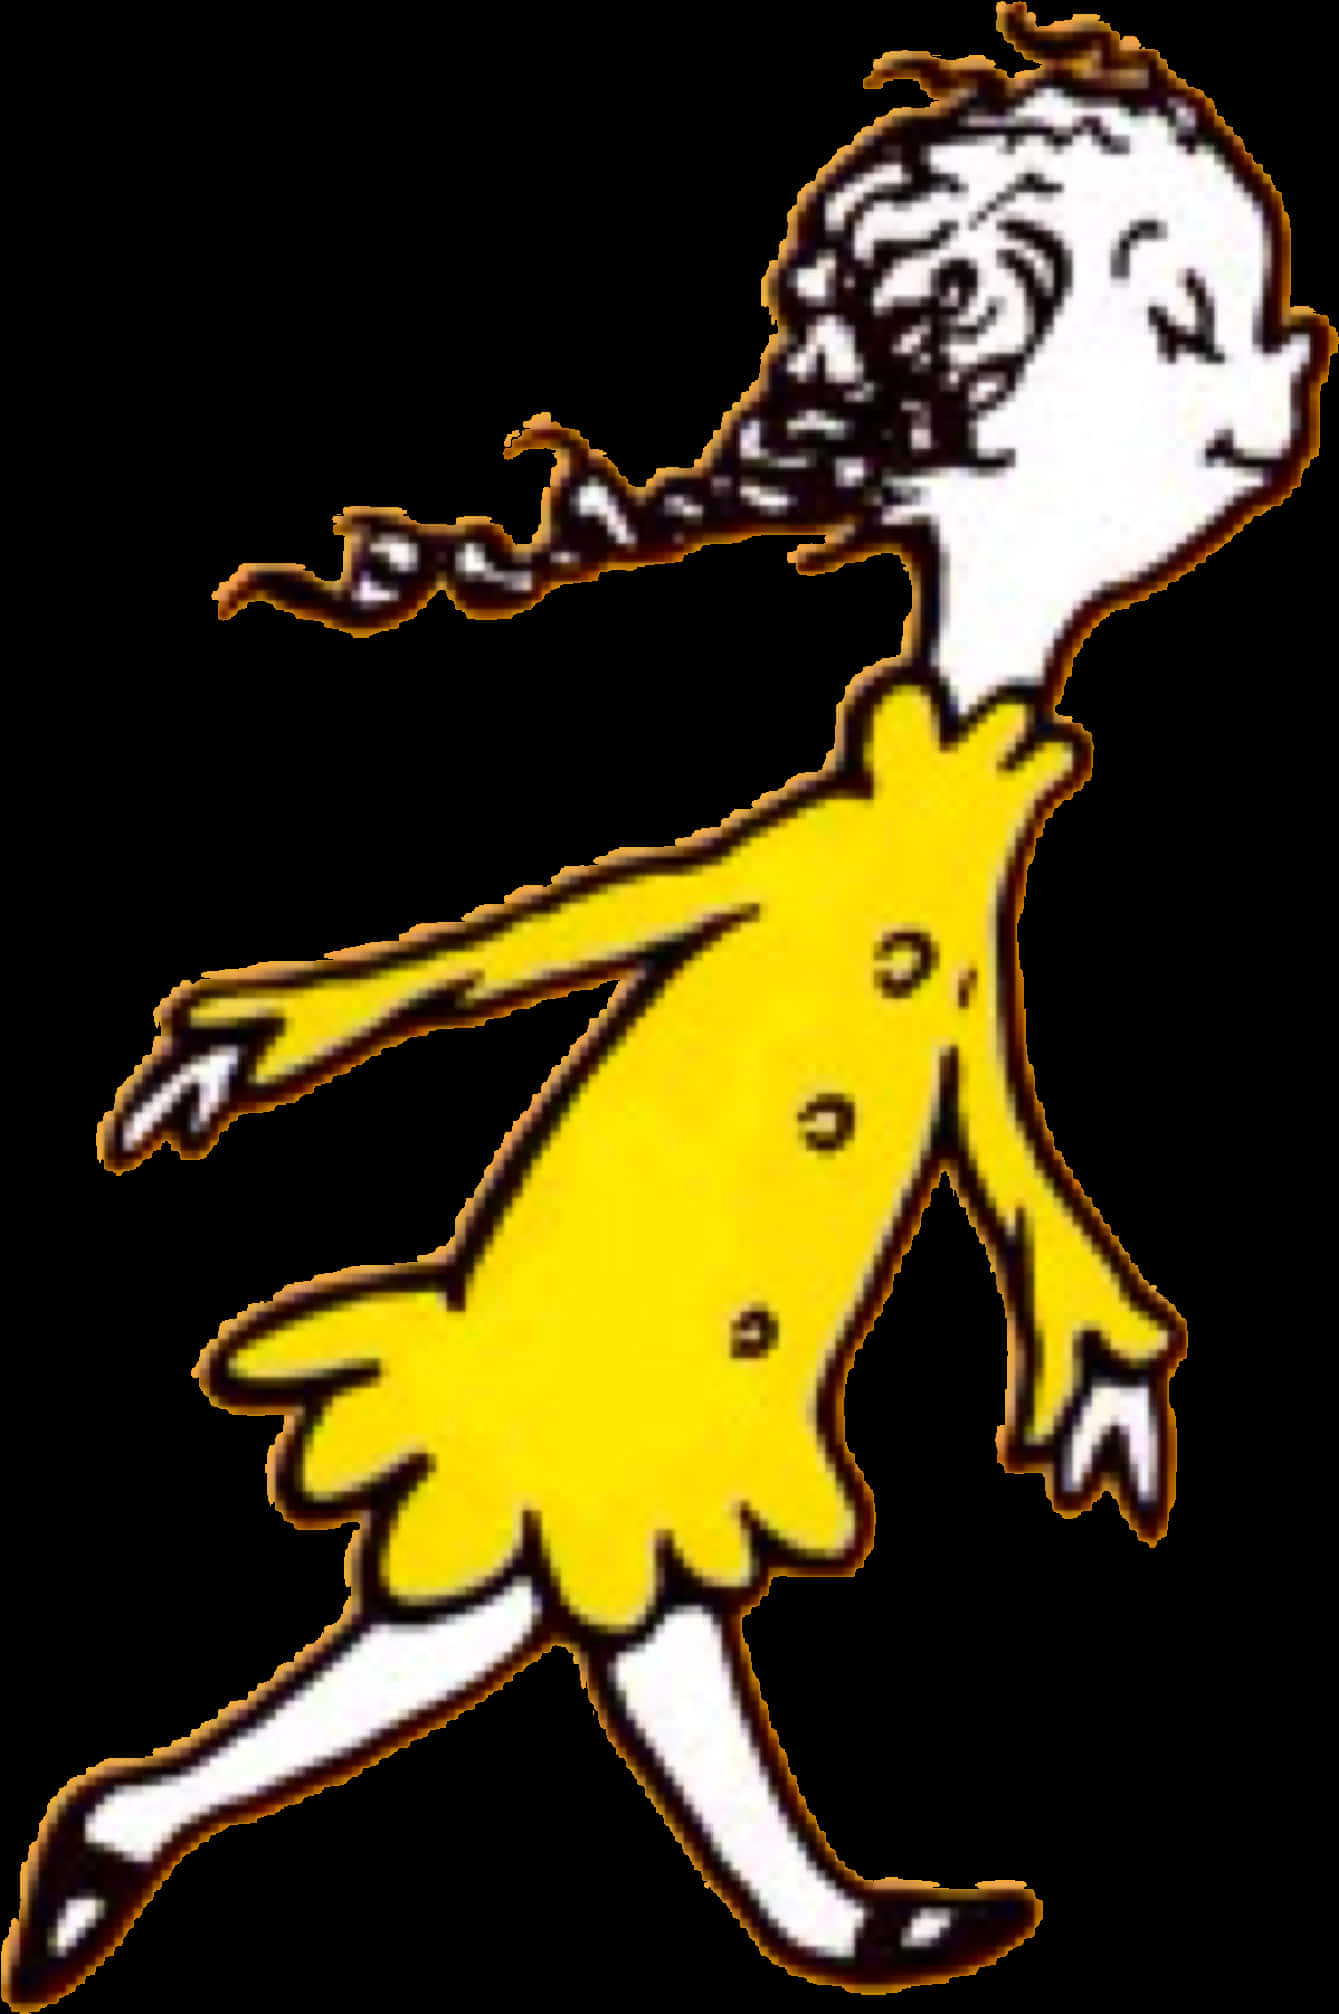 A Cartoon Character In A Yellow Dress